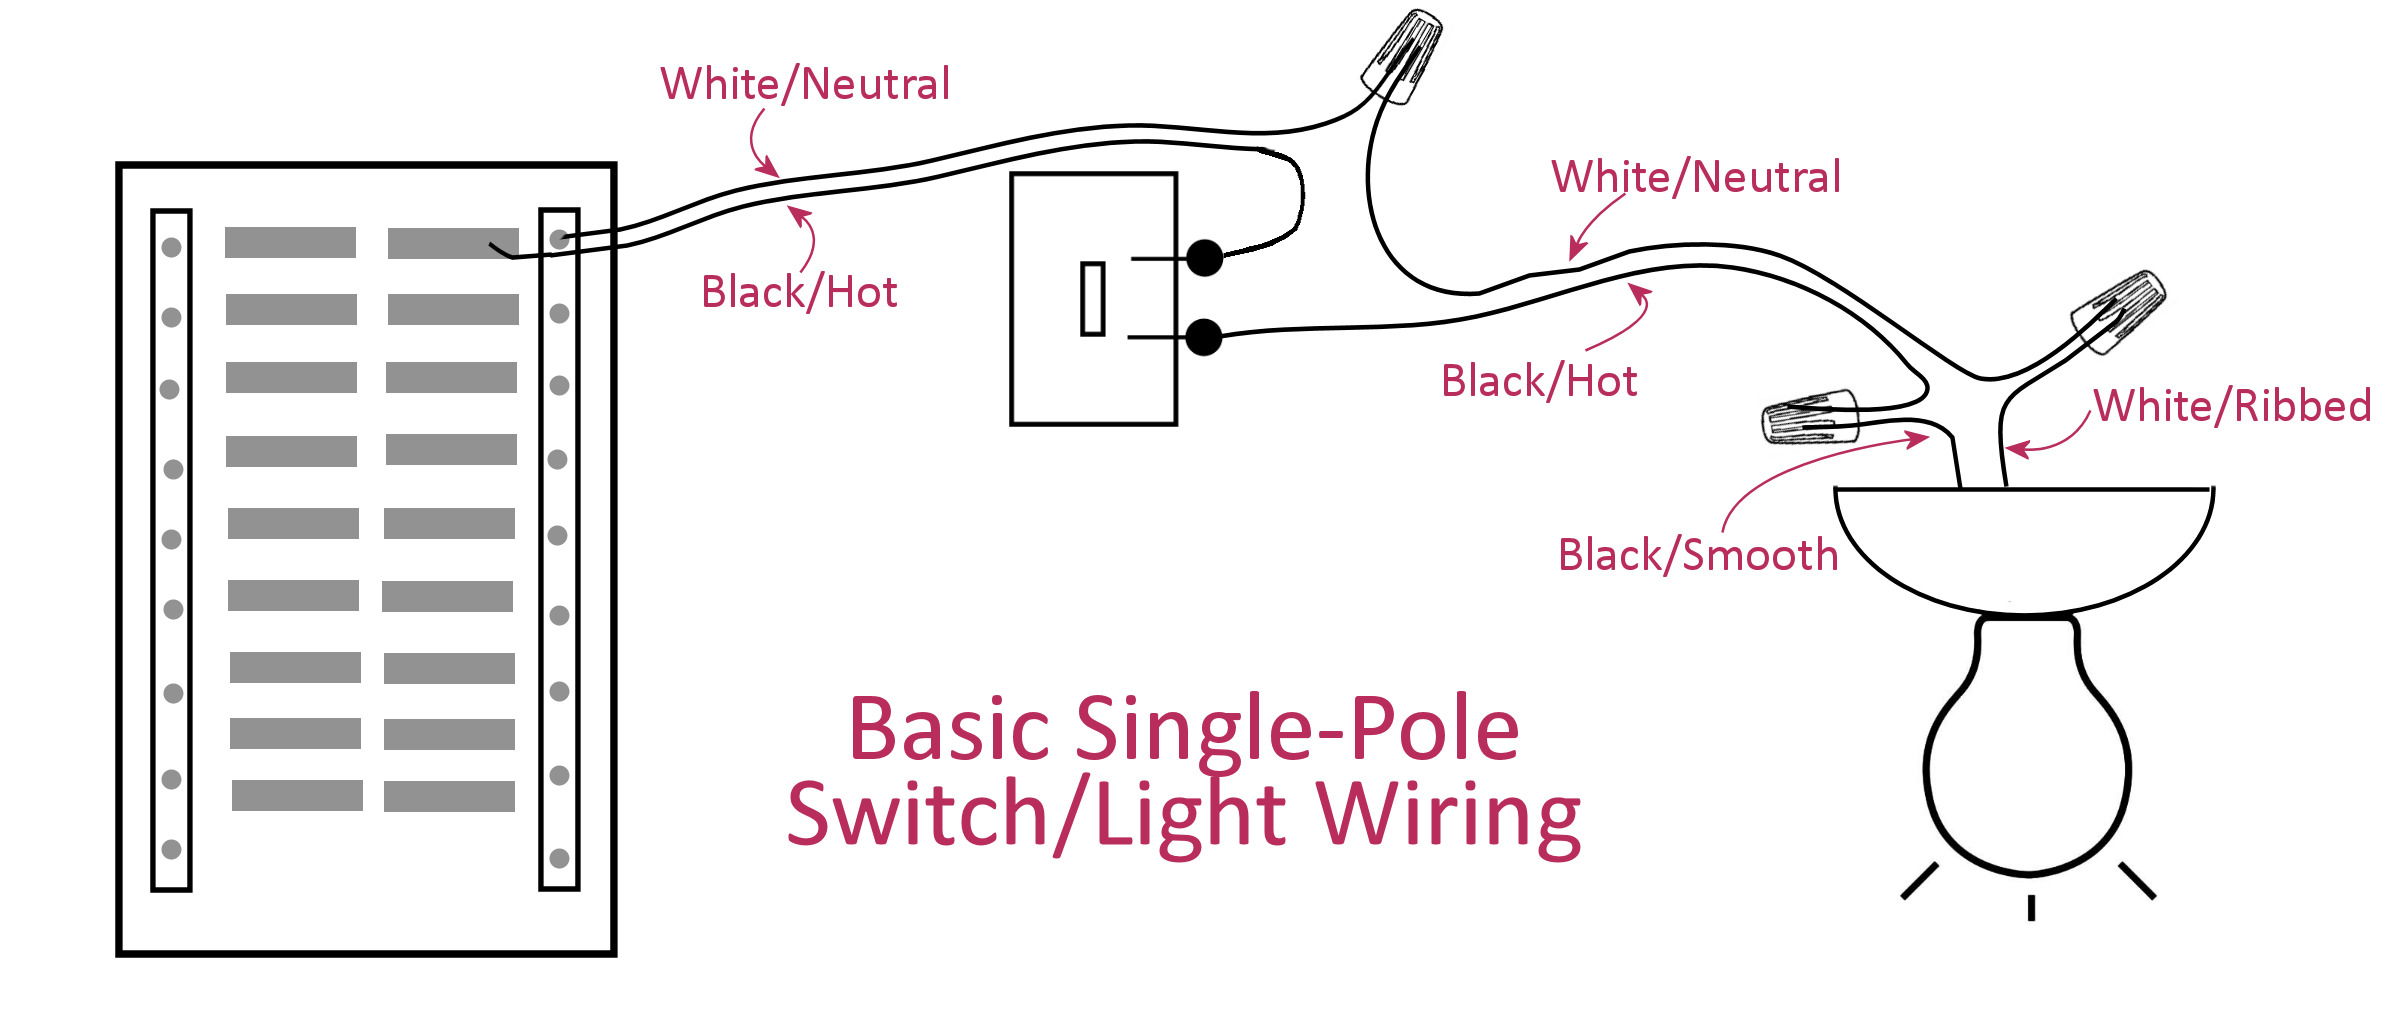 Wiring Diagram For Dimmer Switch Single Pole from www.addicted2decorating.com